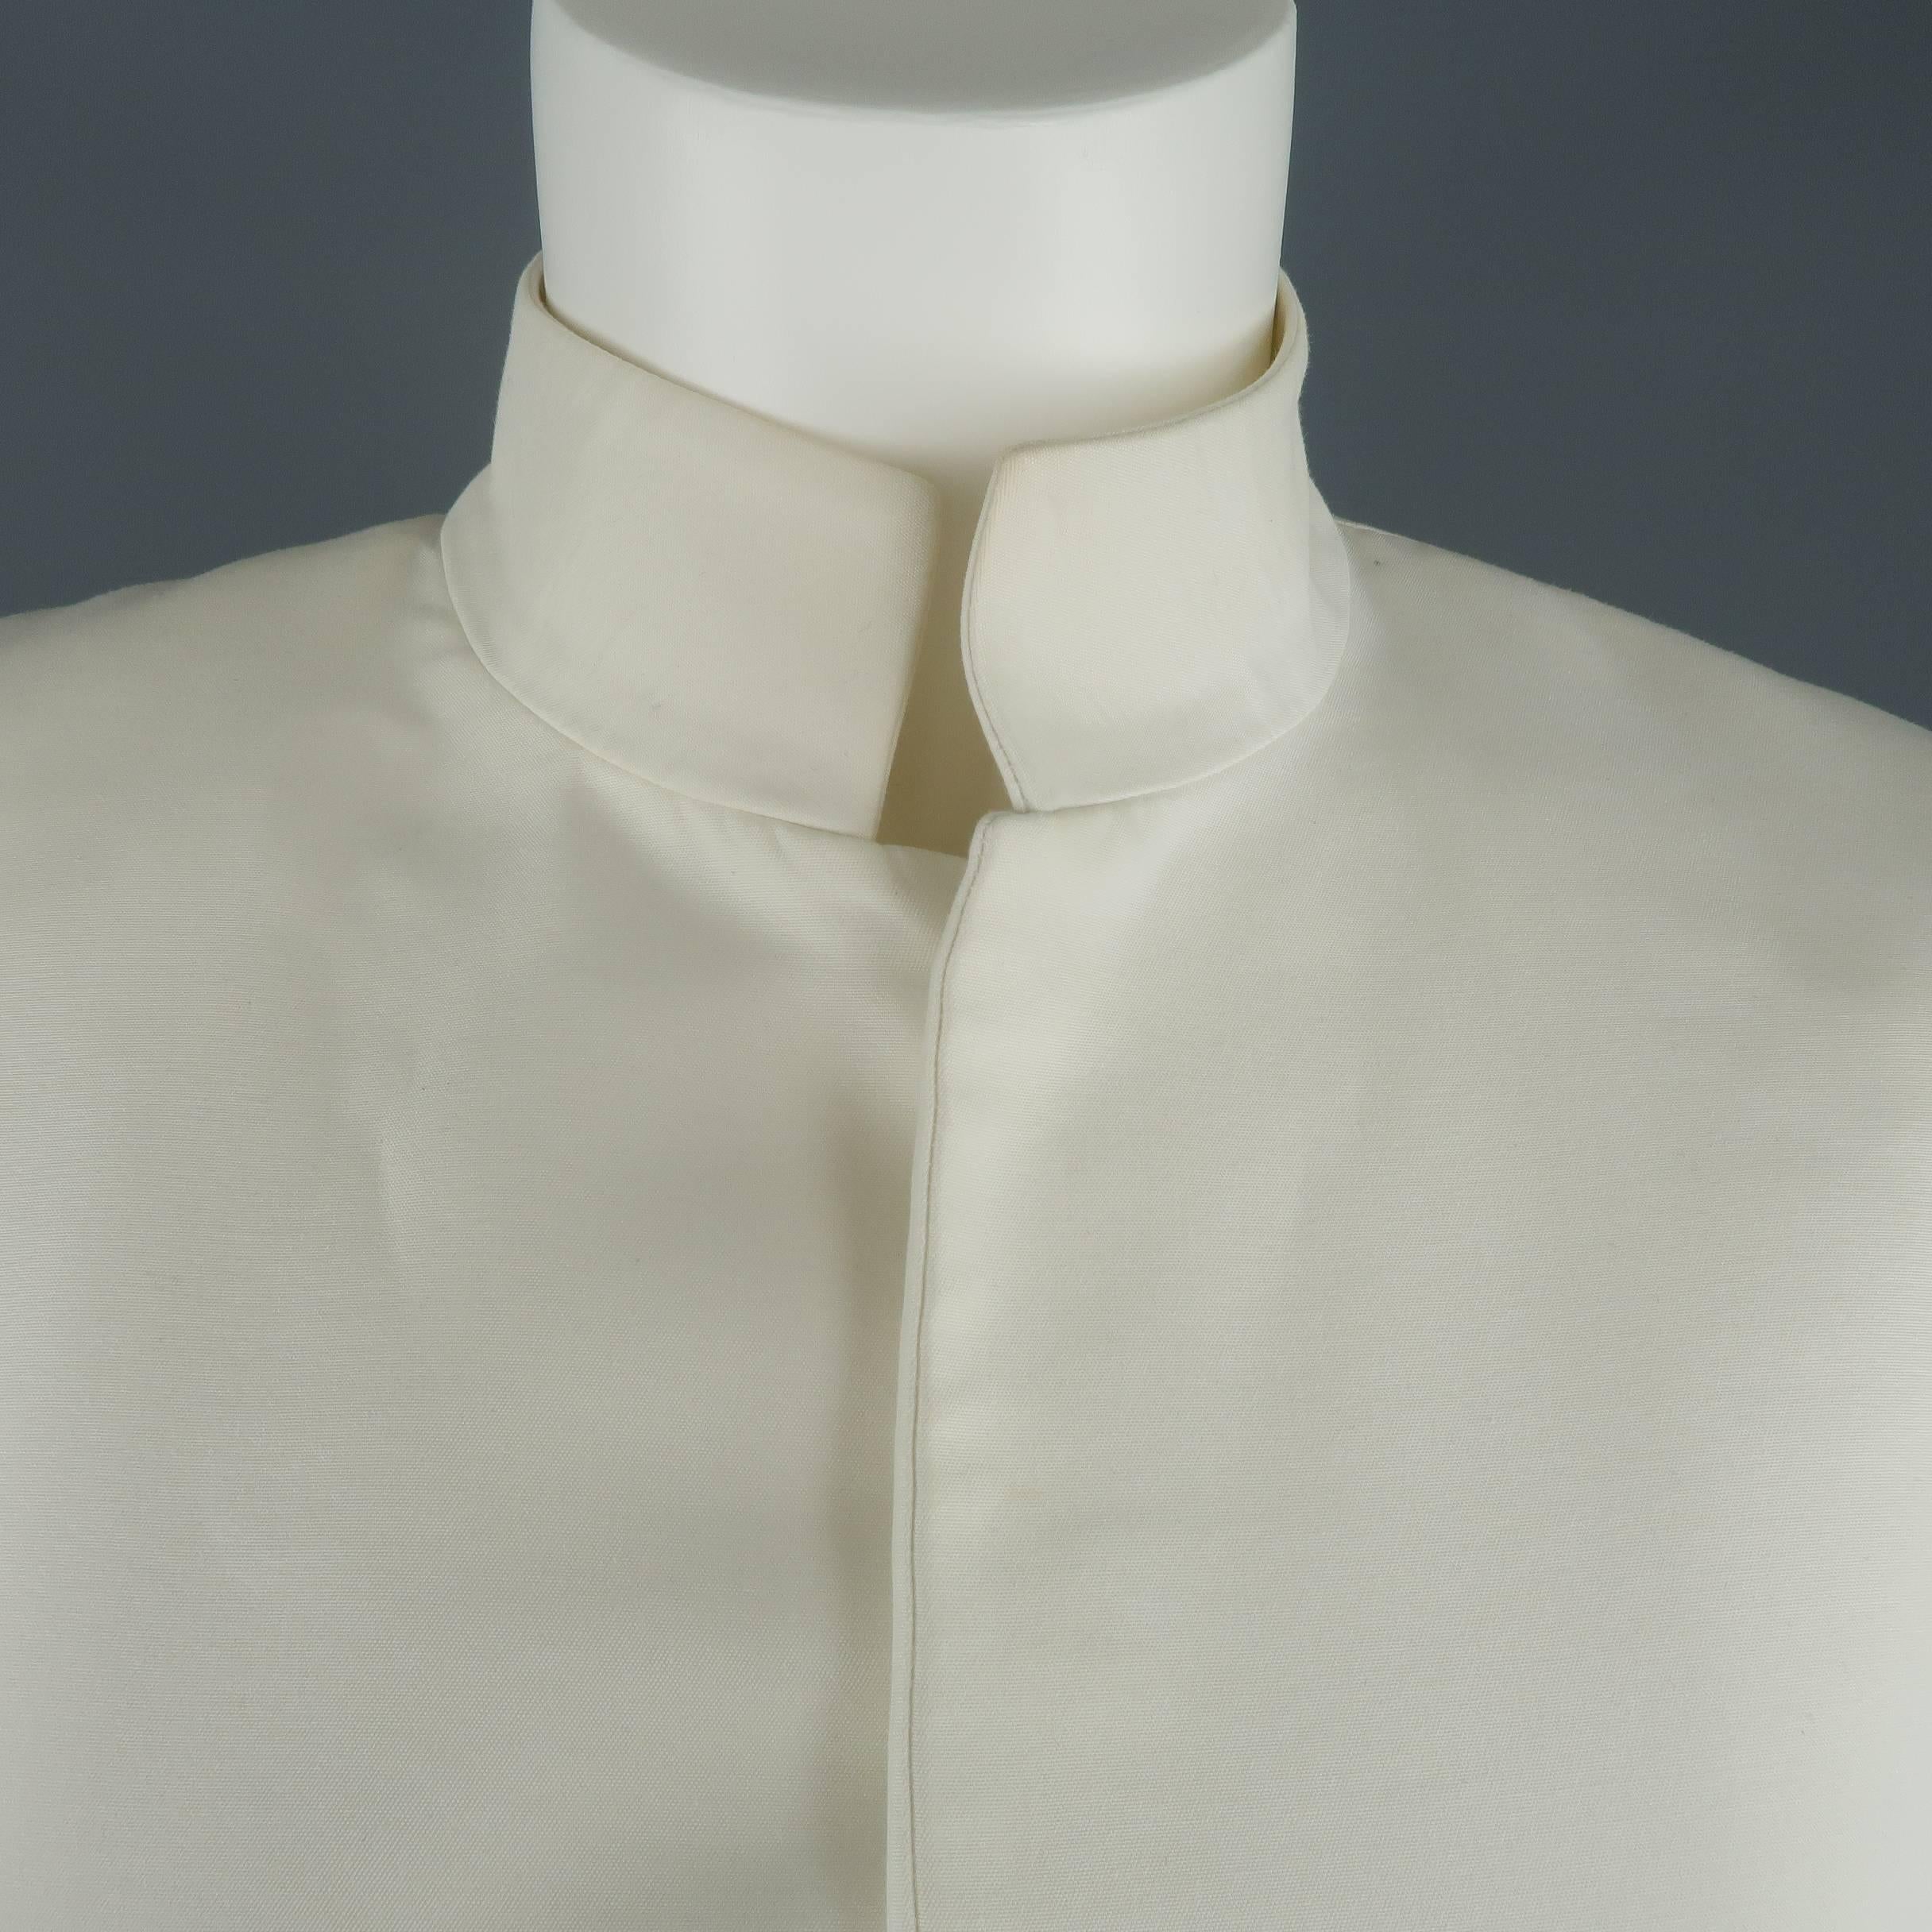 Ralph Lauren Collection jacket comes in off white cotton silk blend fabric with a hidden placket closure and stand up Nehru collar. Matching flared pants available separately. Made in Italy.
 
Excellent Pre-Owned Condition.
Marked: 8
